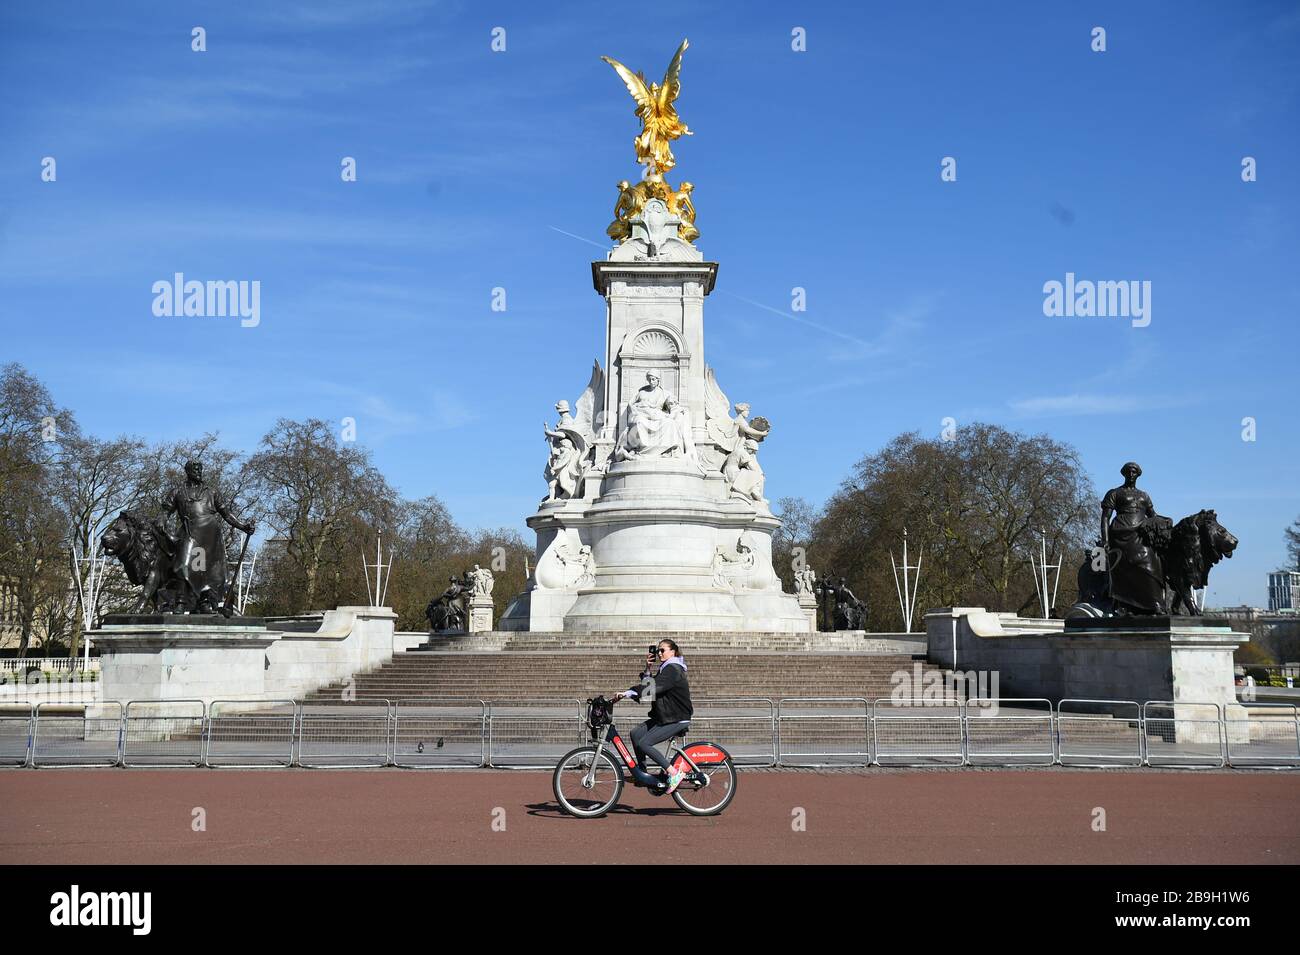 Victoria Memorial looking empty in London, the day after Prime Minister Boris Johnson put the UK in lockdown to help curb the spread of the coronavirus. Stock Photo